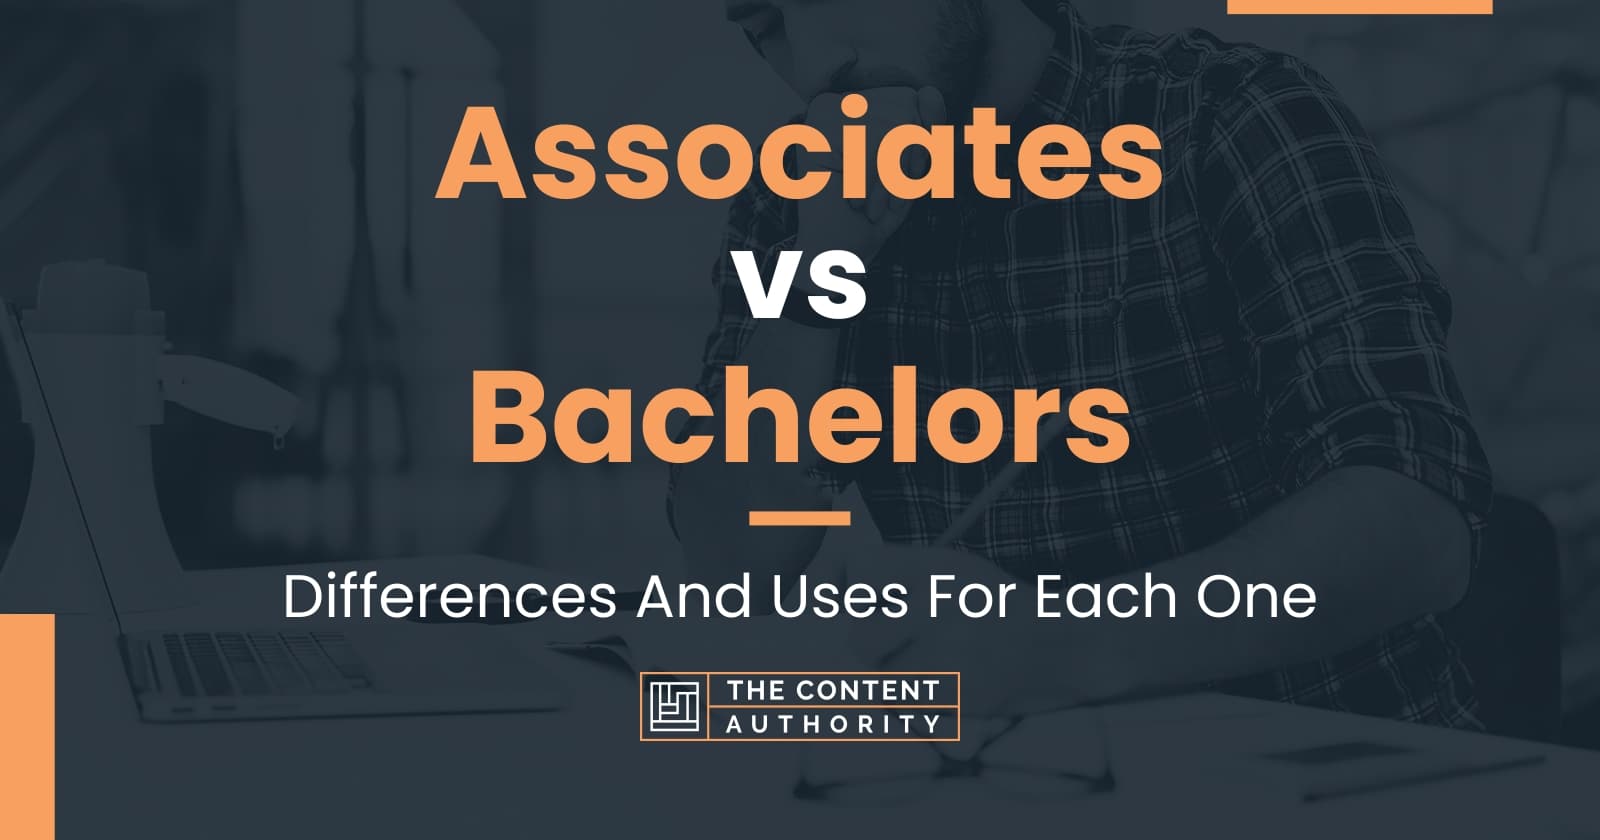 Associates Vs Bachelors Differences And Uses For Each One